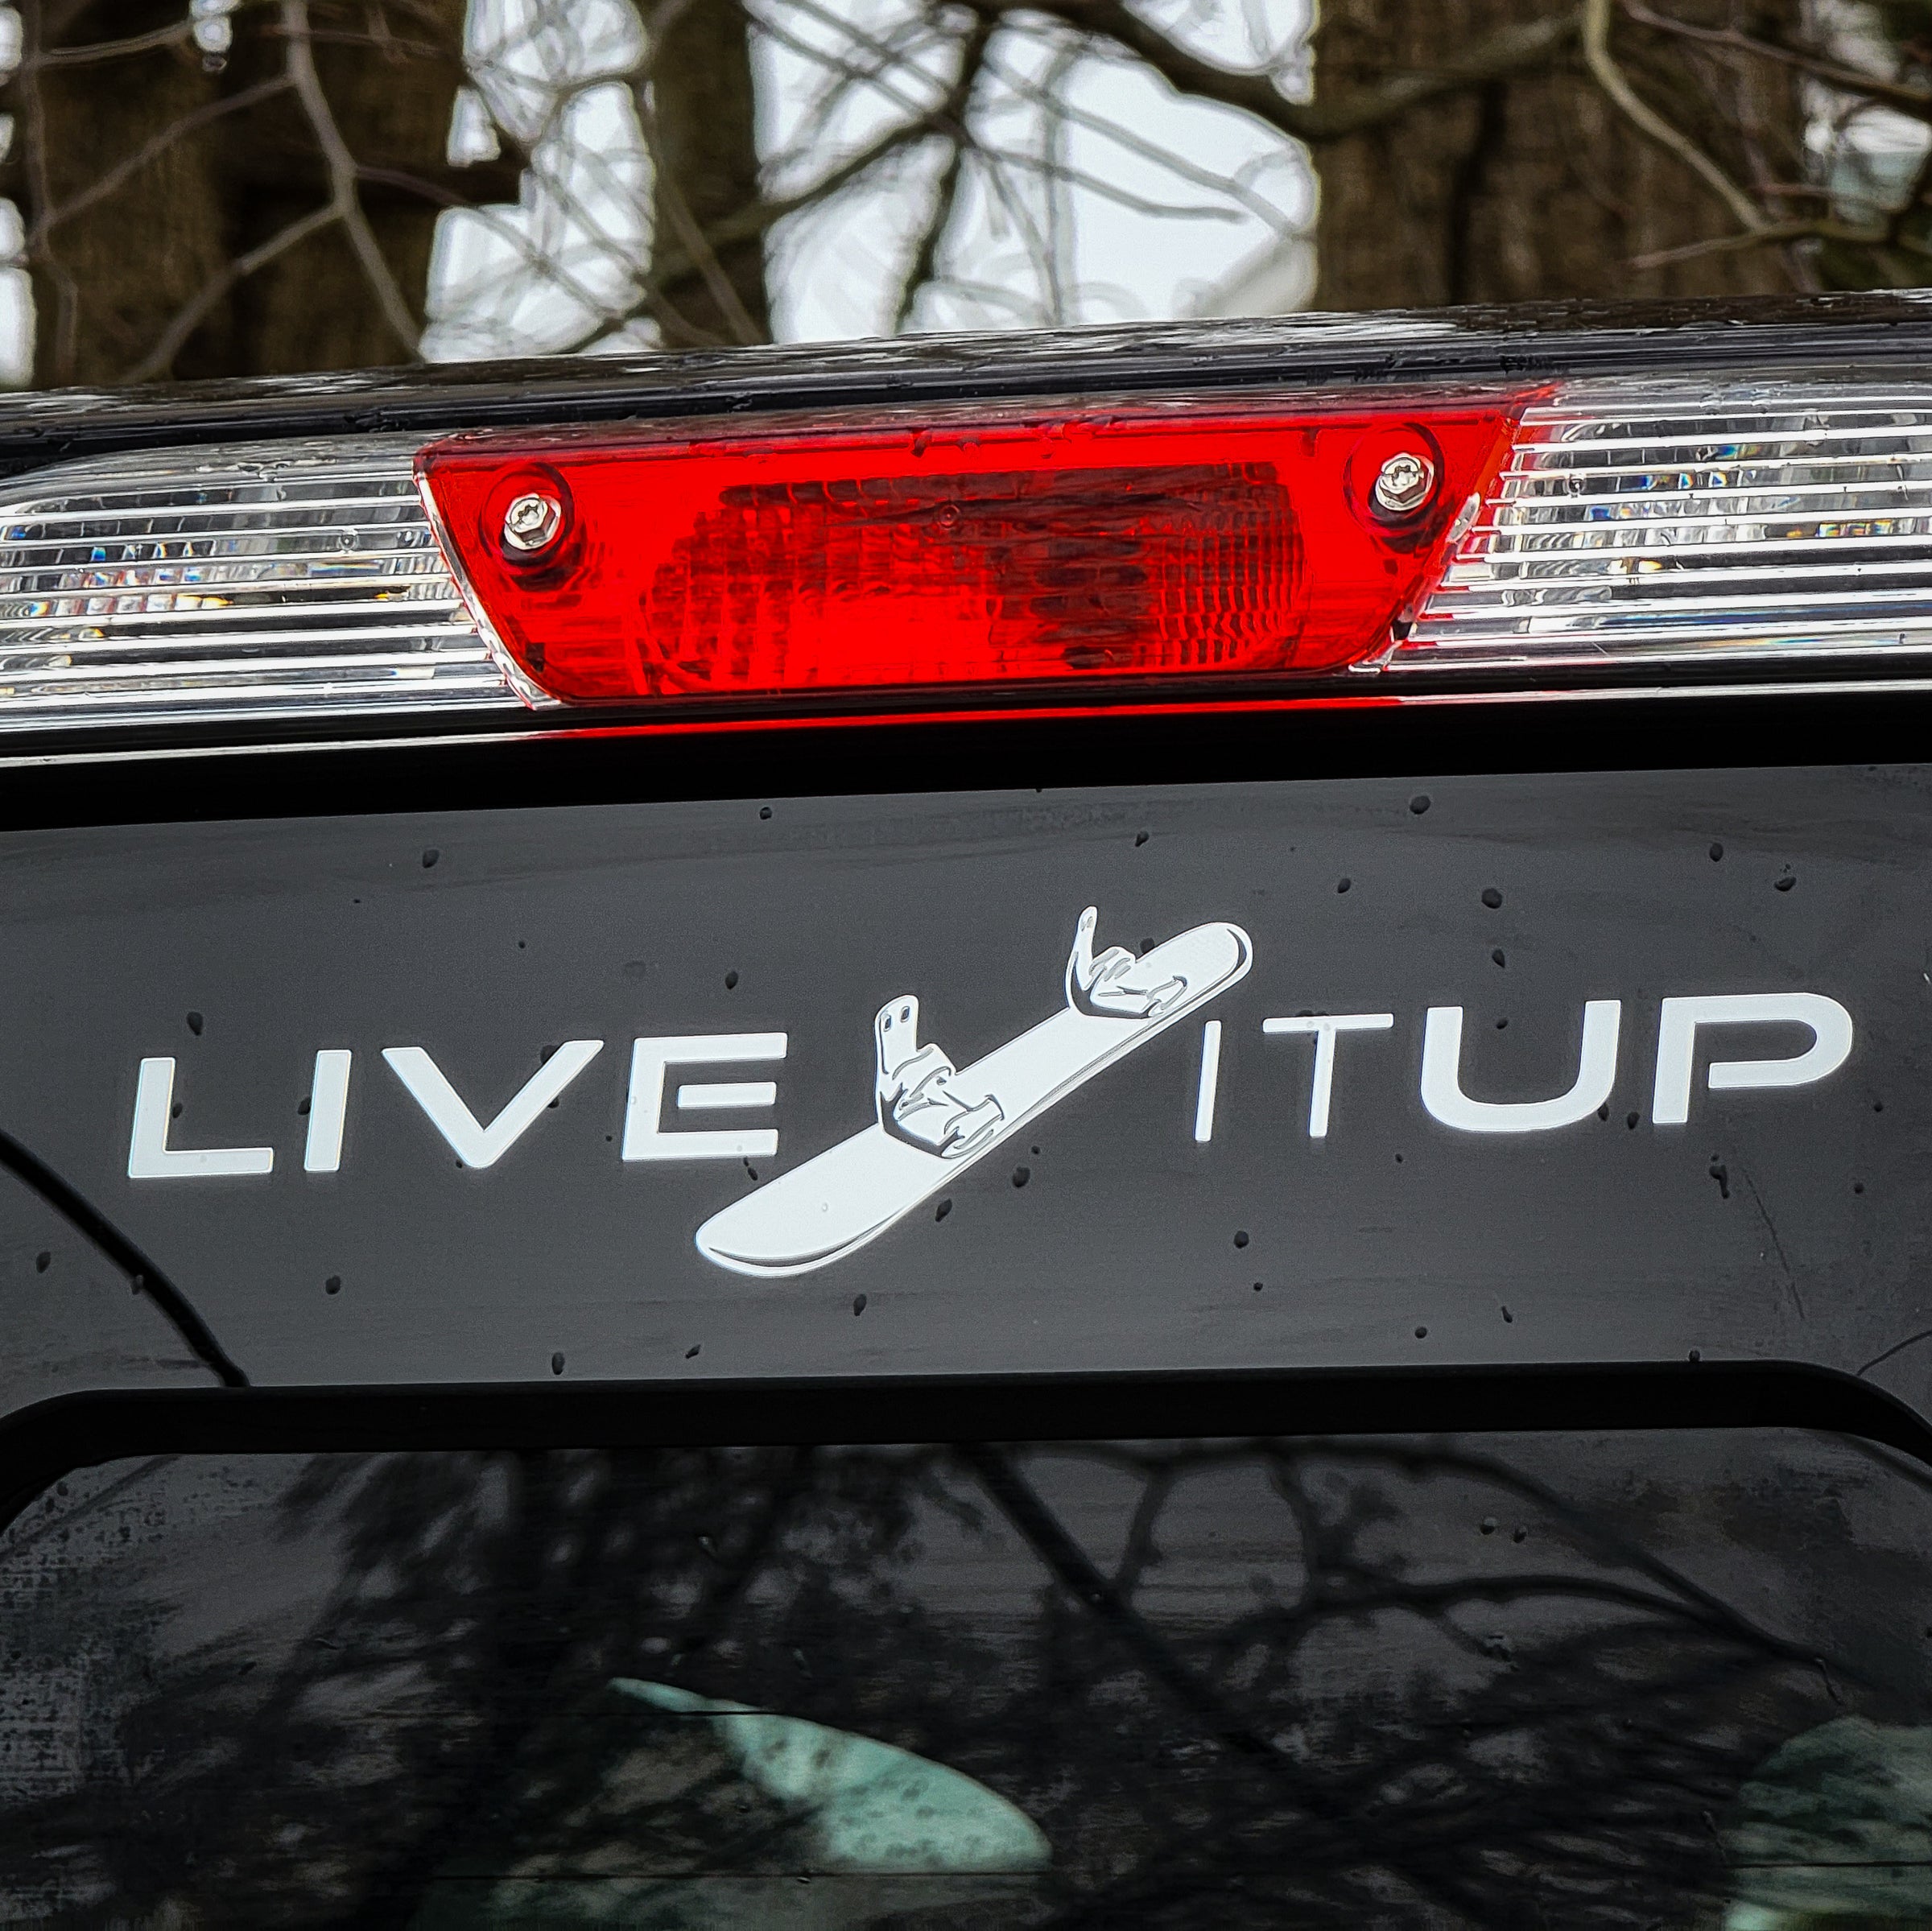 Live it Up Vinyl Decal on Truck or Car Window Snowboard High Performance Vinyl Window Decal for Active Lifestyle Adventure and Outdoors